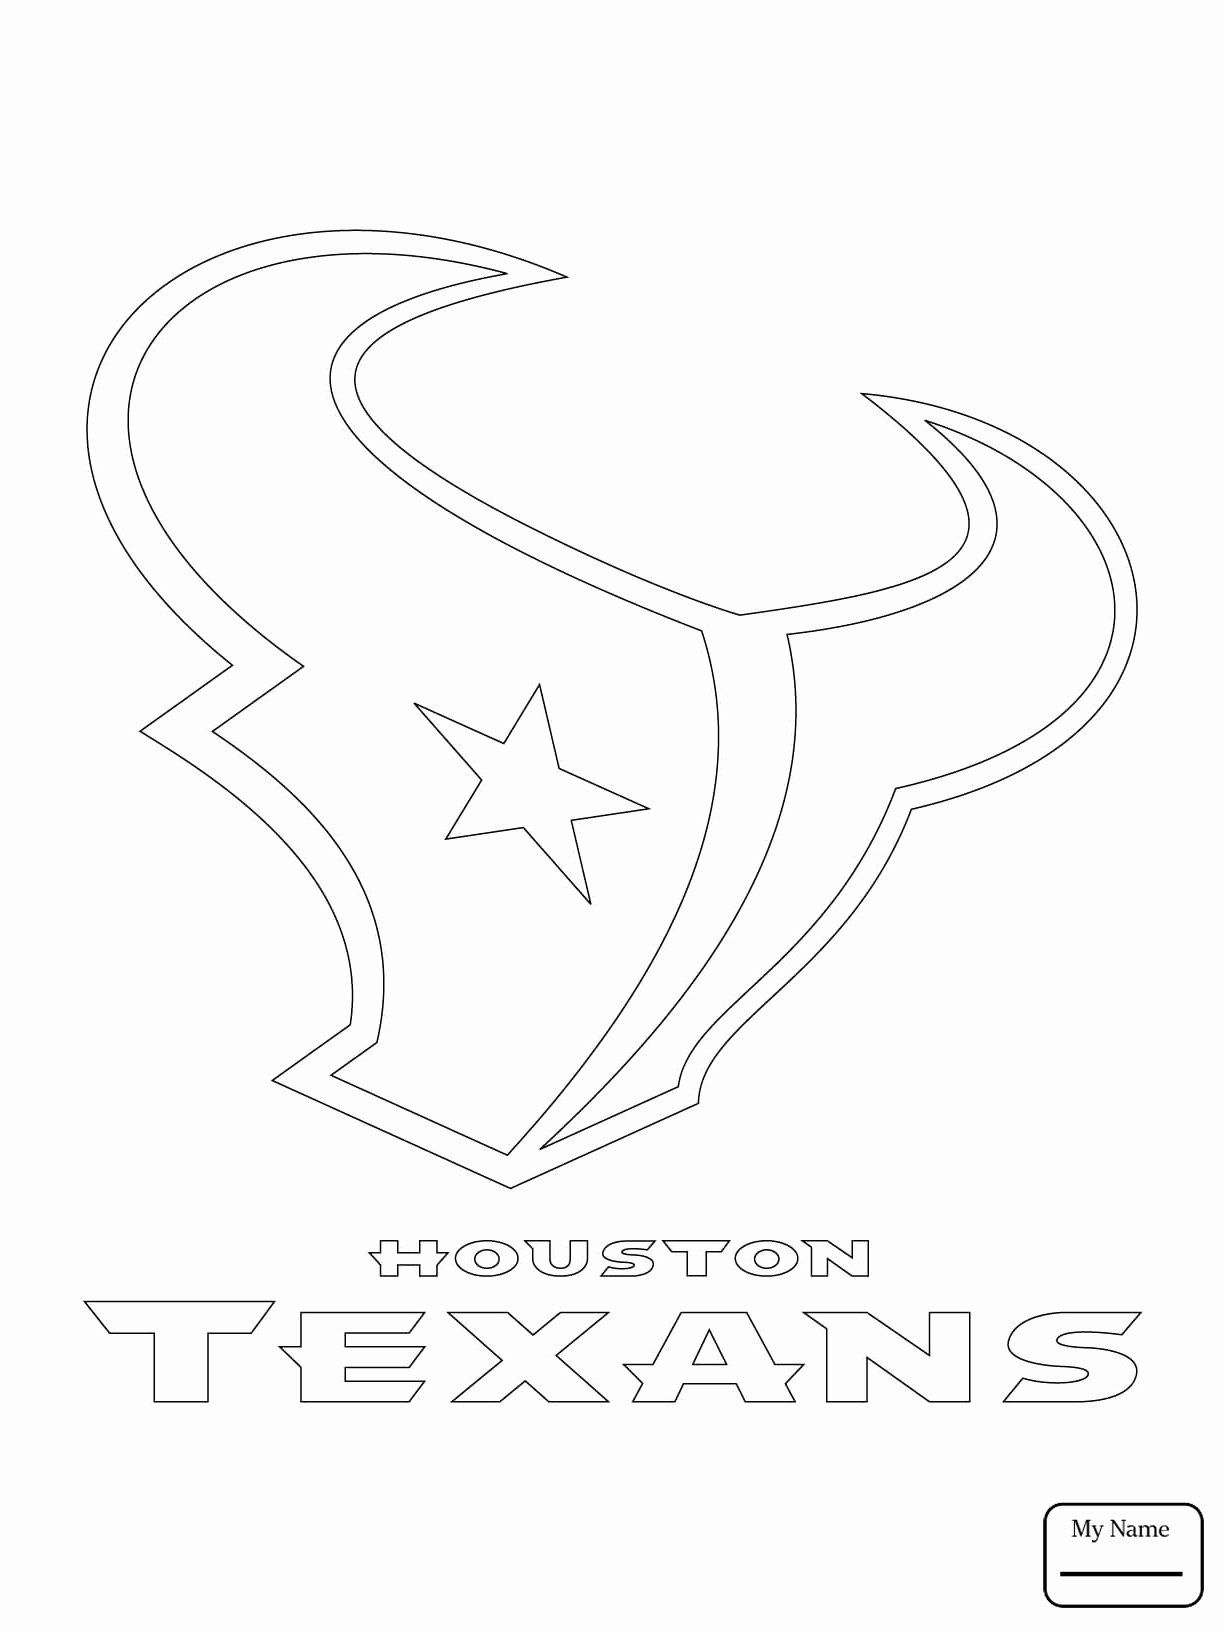 28 Dallas Cowboys Coloring Page in 2020 | Sports coloring pages ...